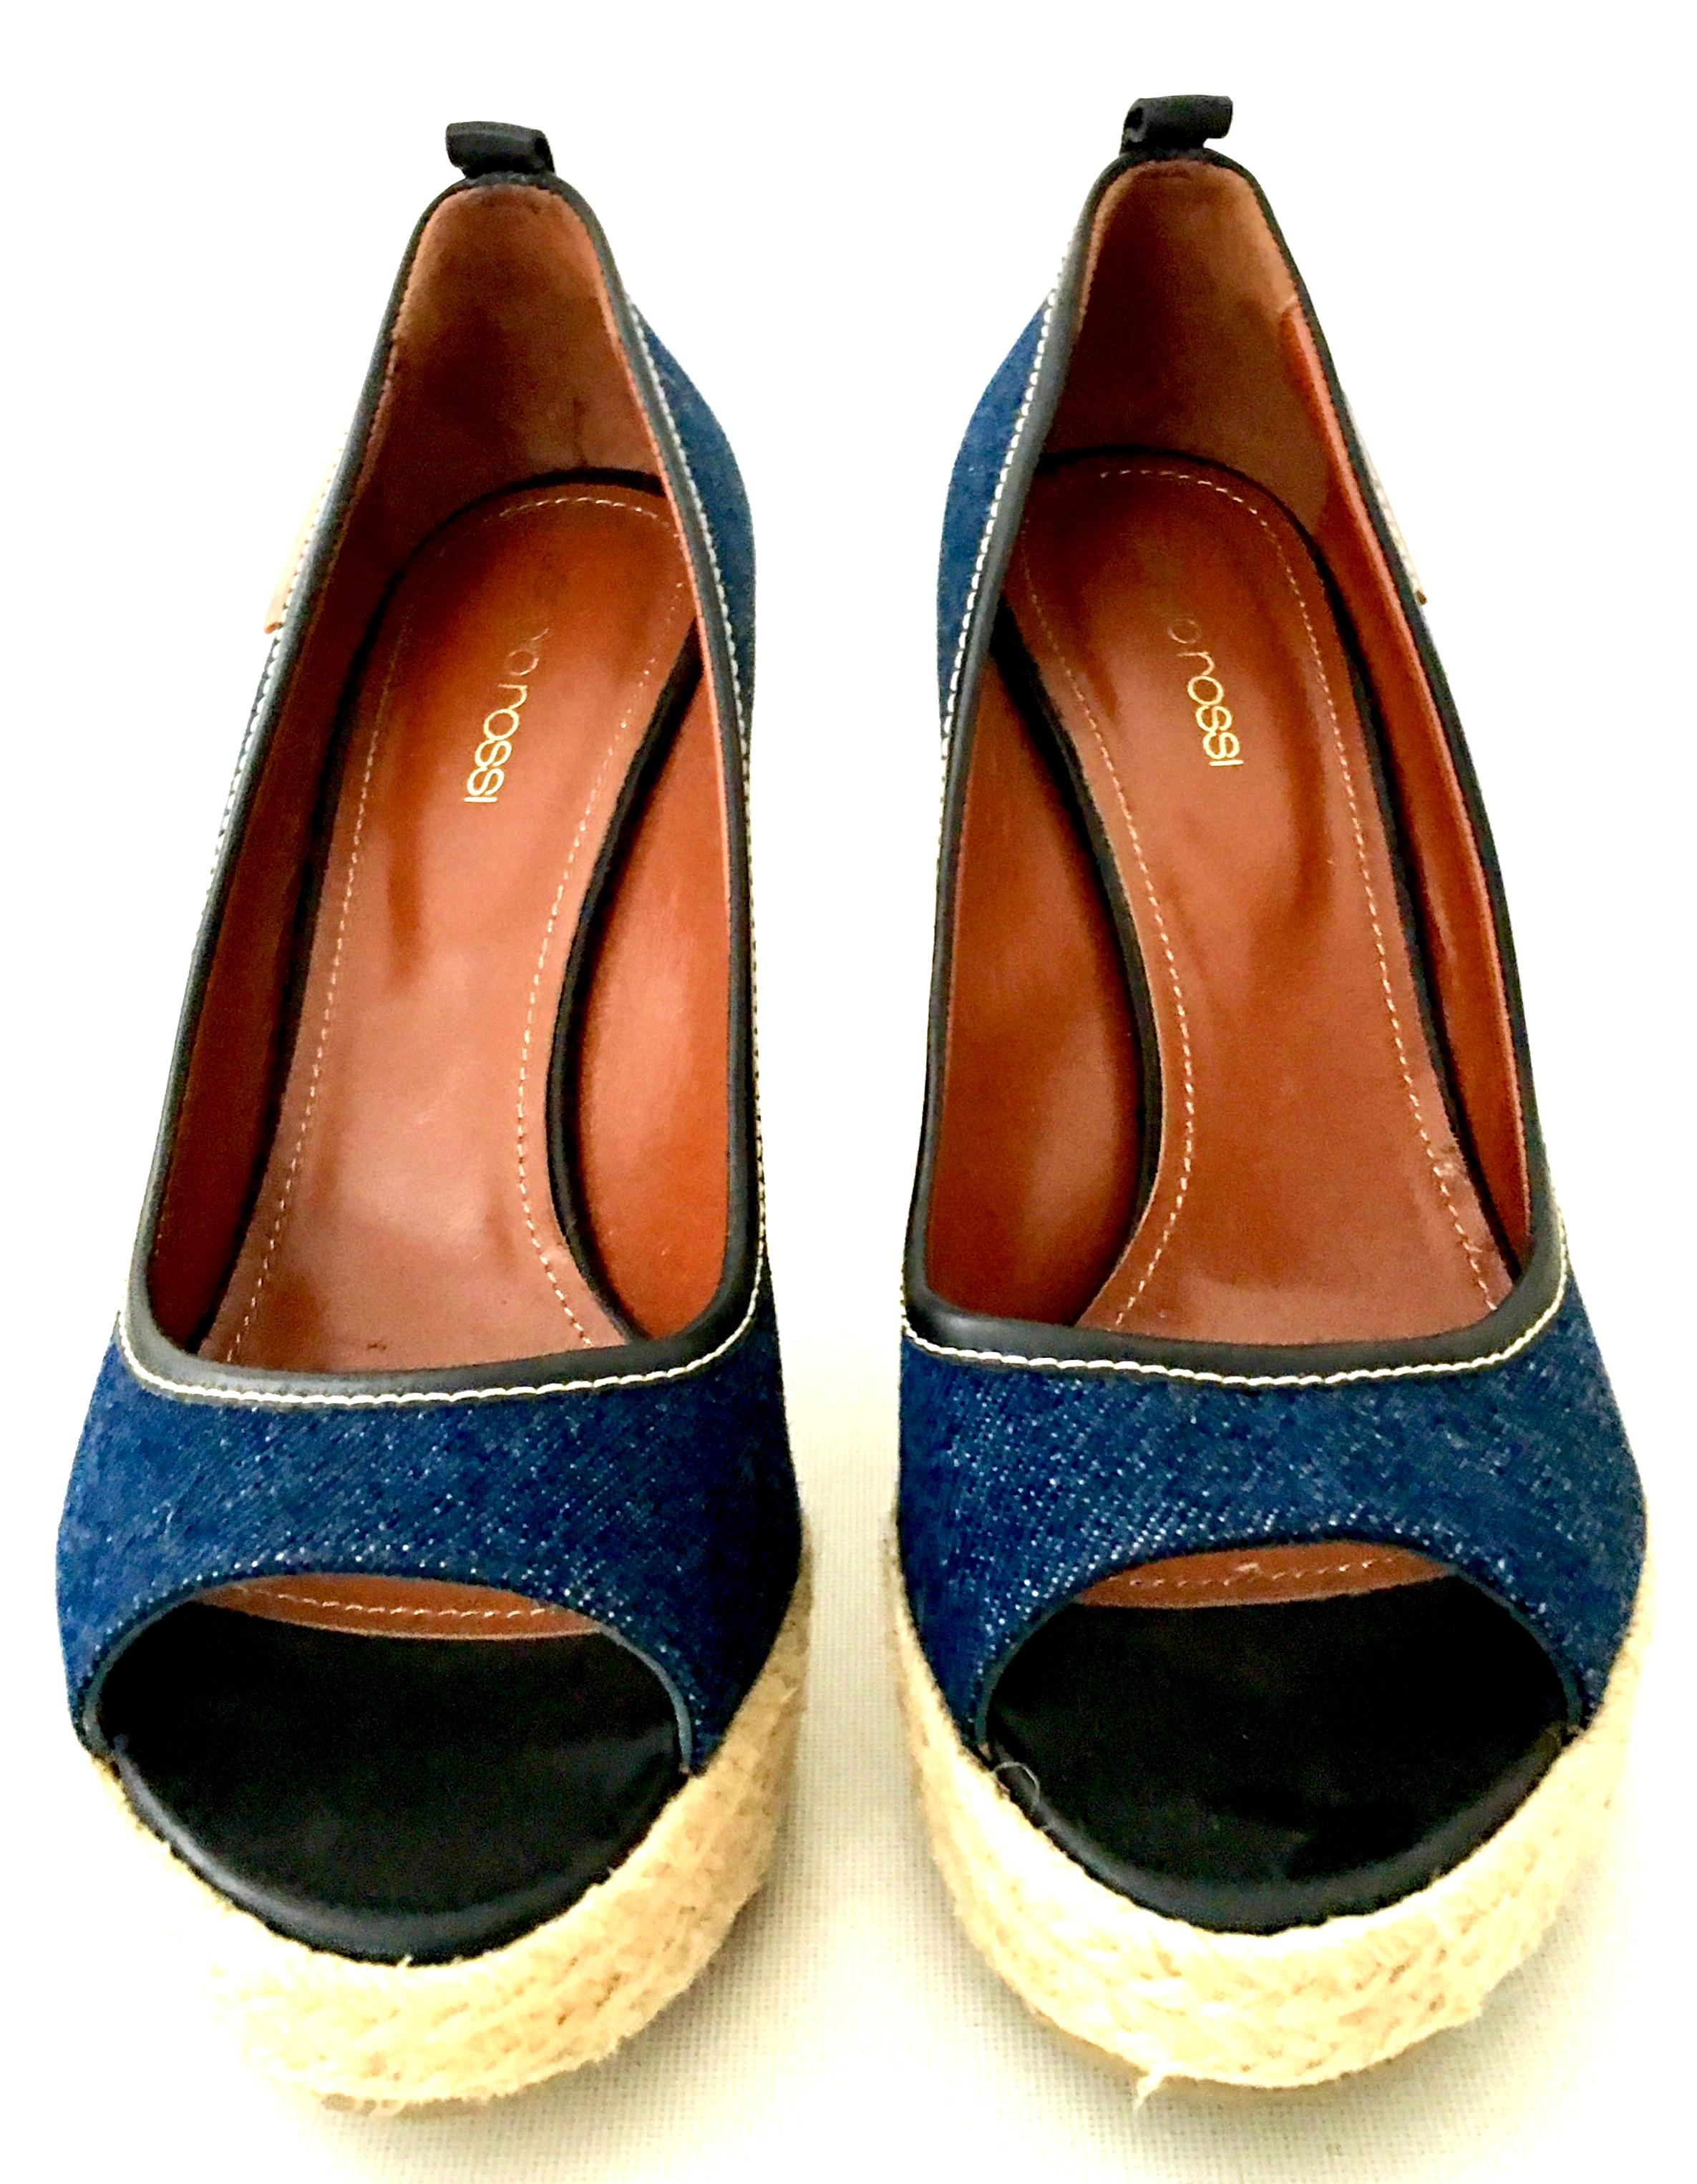 Contemorary Sergio Rossi Leather, Denim & Raffia Platform Wedge Shoes-39.5 In Good Condition For Sale In West Palm Beach, FL